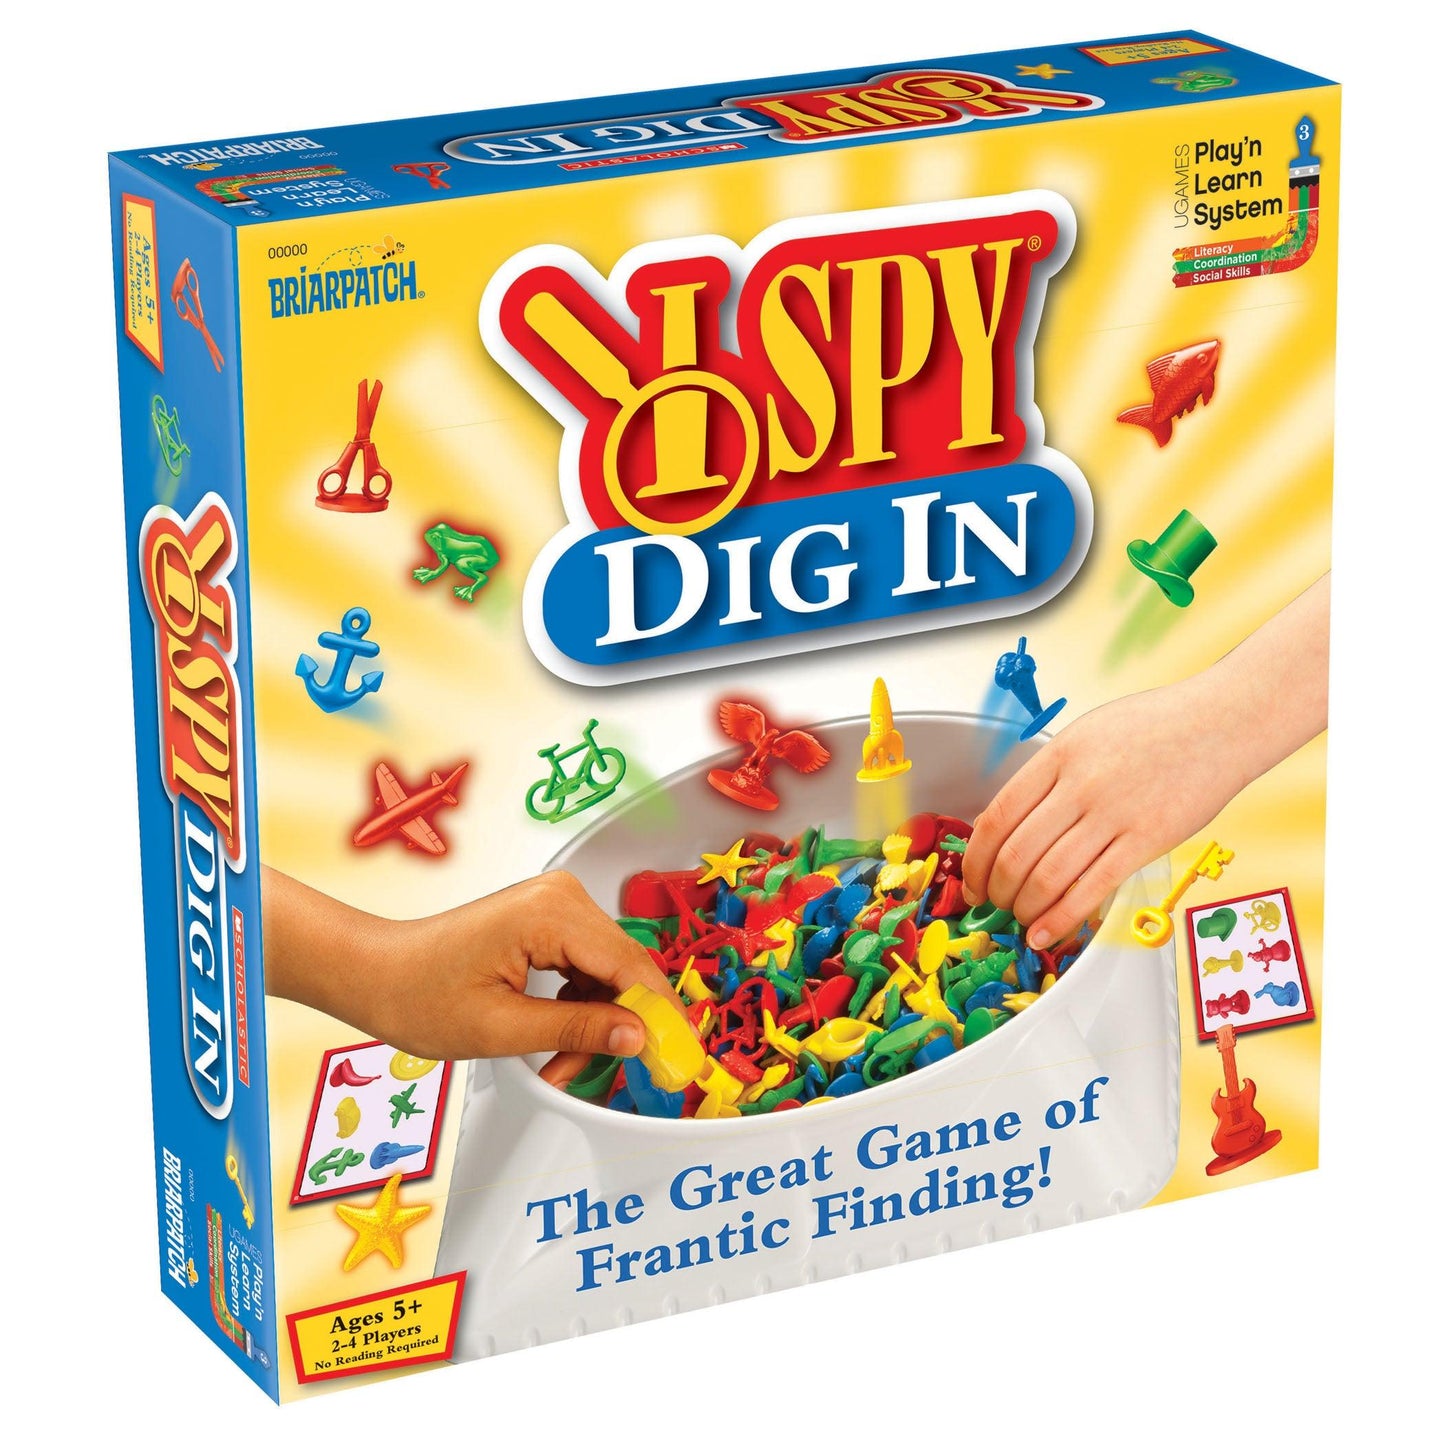 I Spy® Dig In® The Great Game of Frantic Finding - Loomini